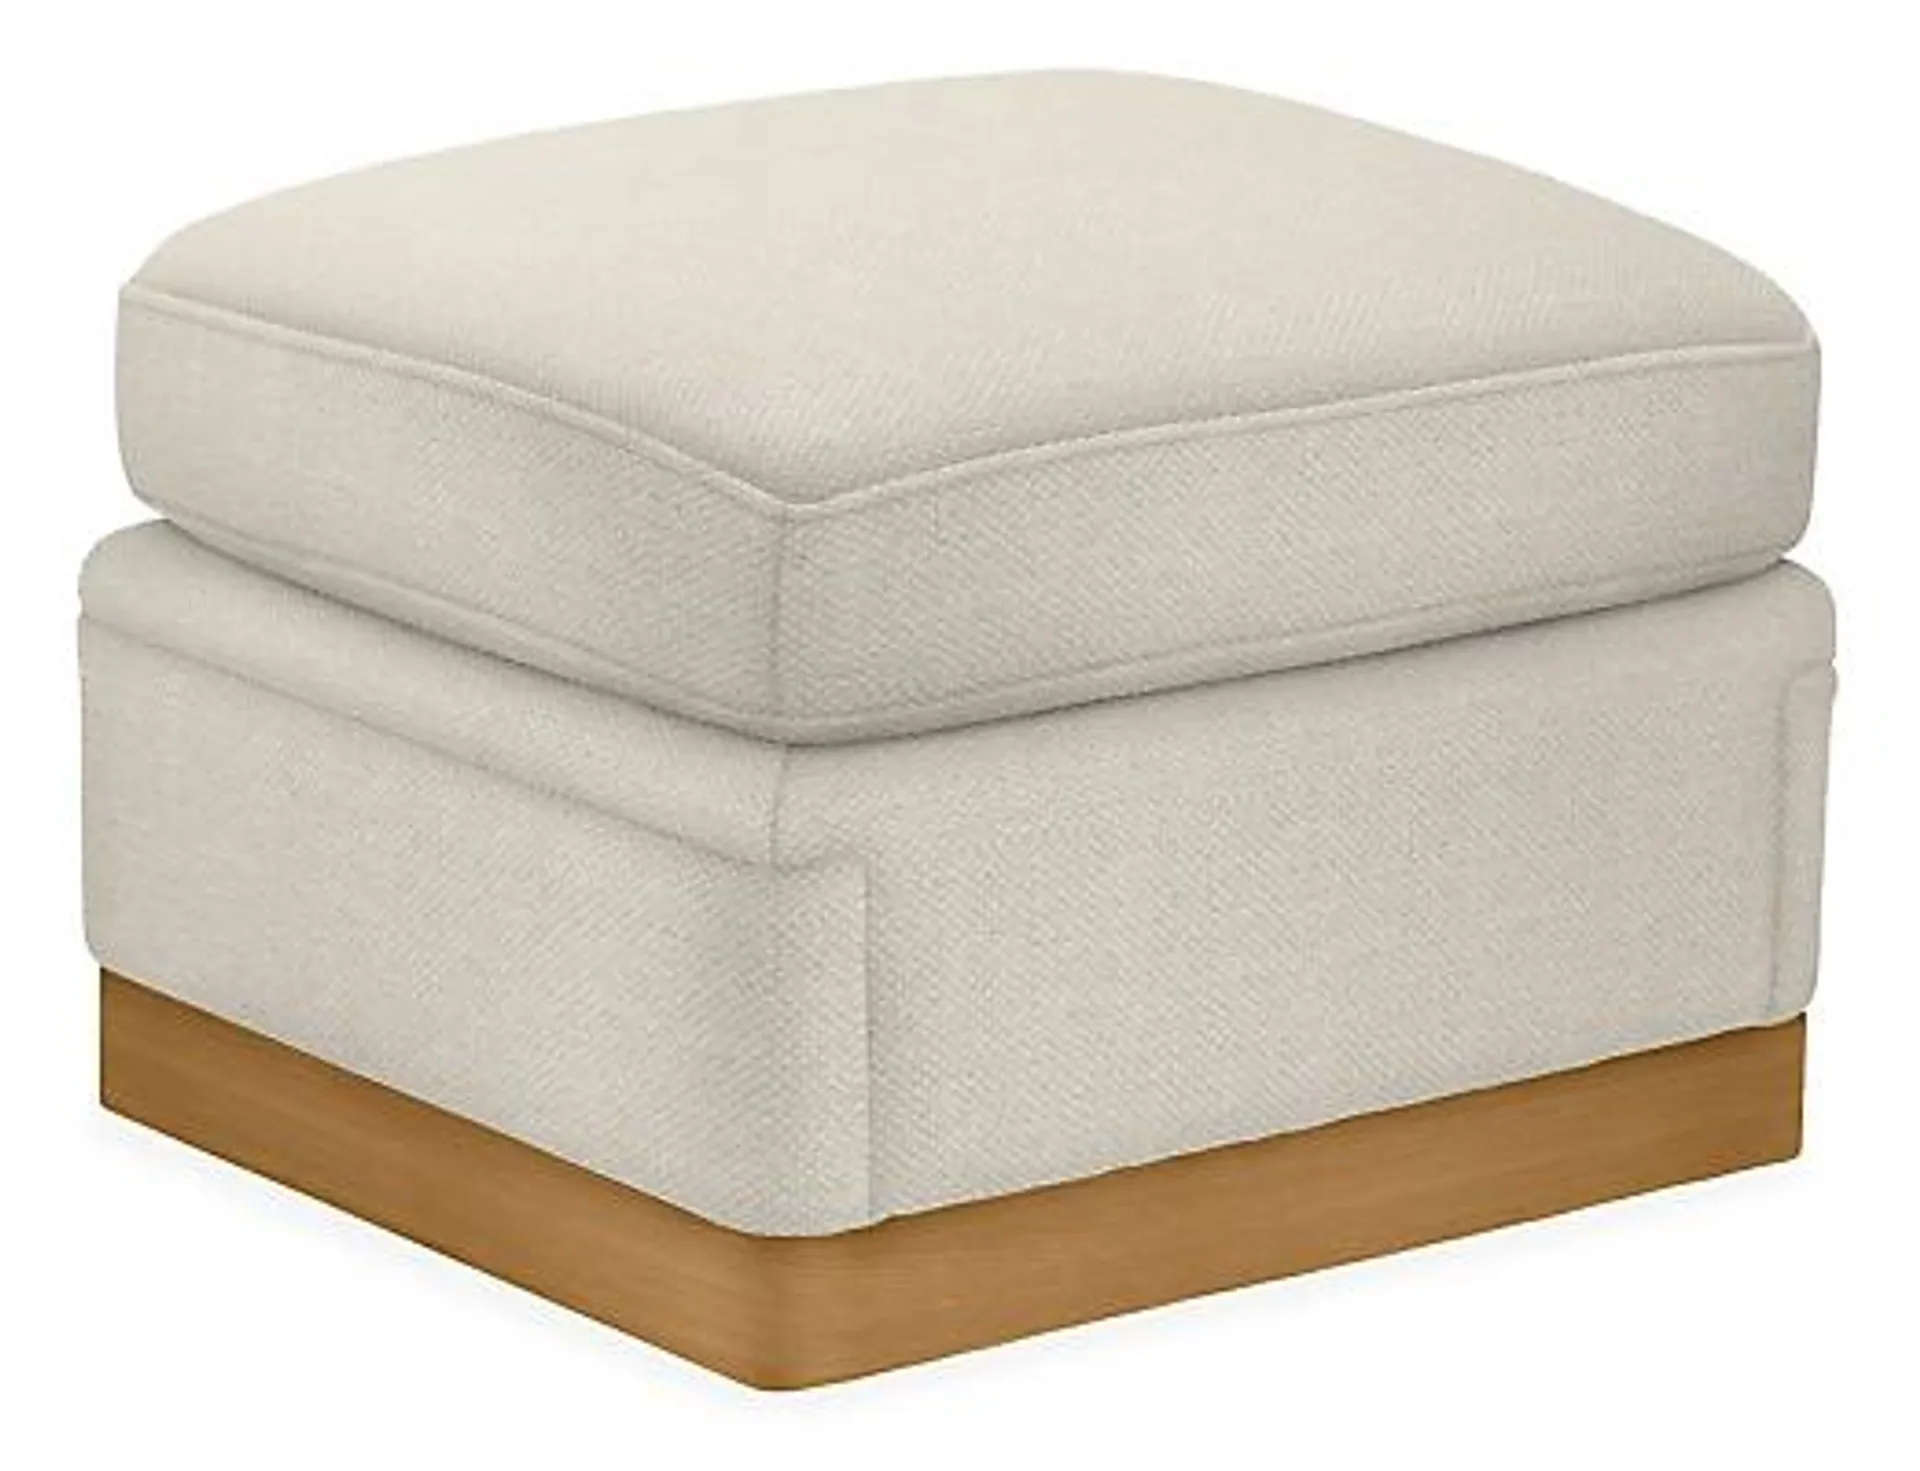 Markus 23w 20d 16h Ottoman in Arin Ivory with White Oak Base